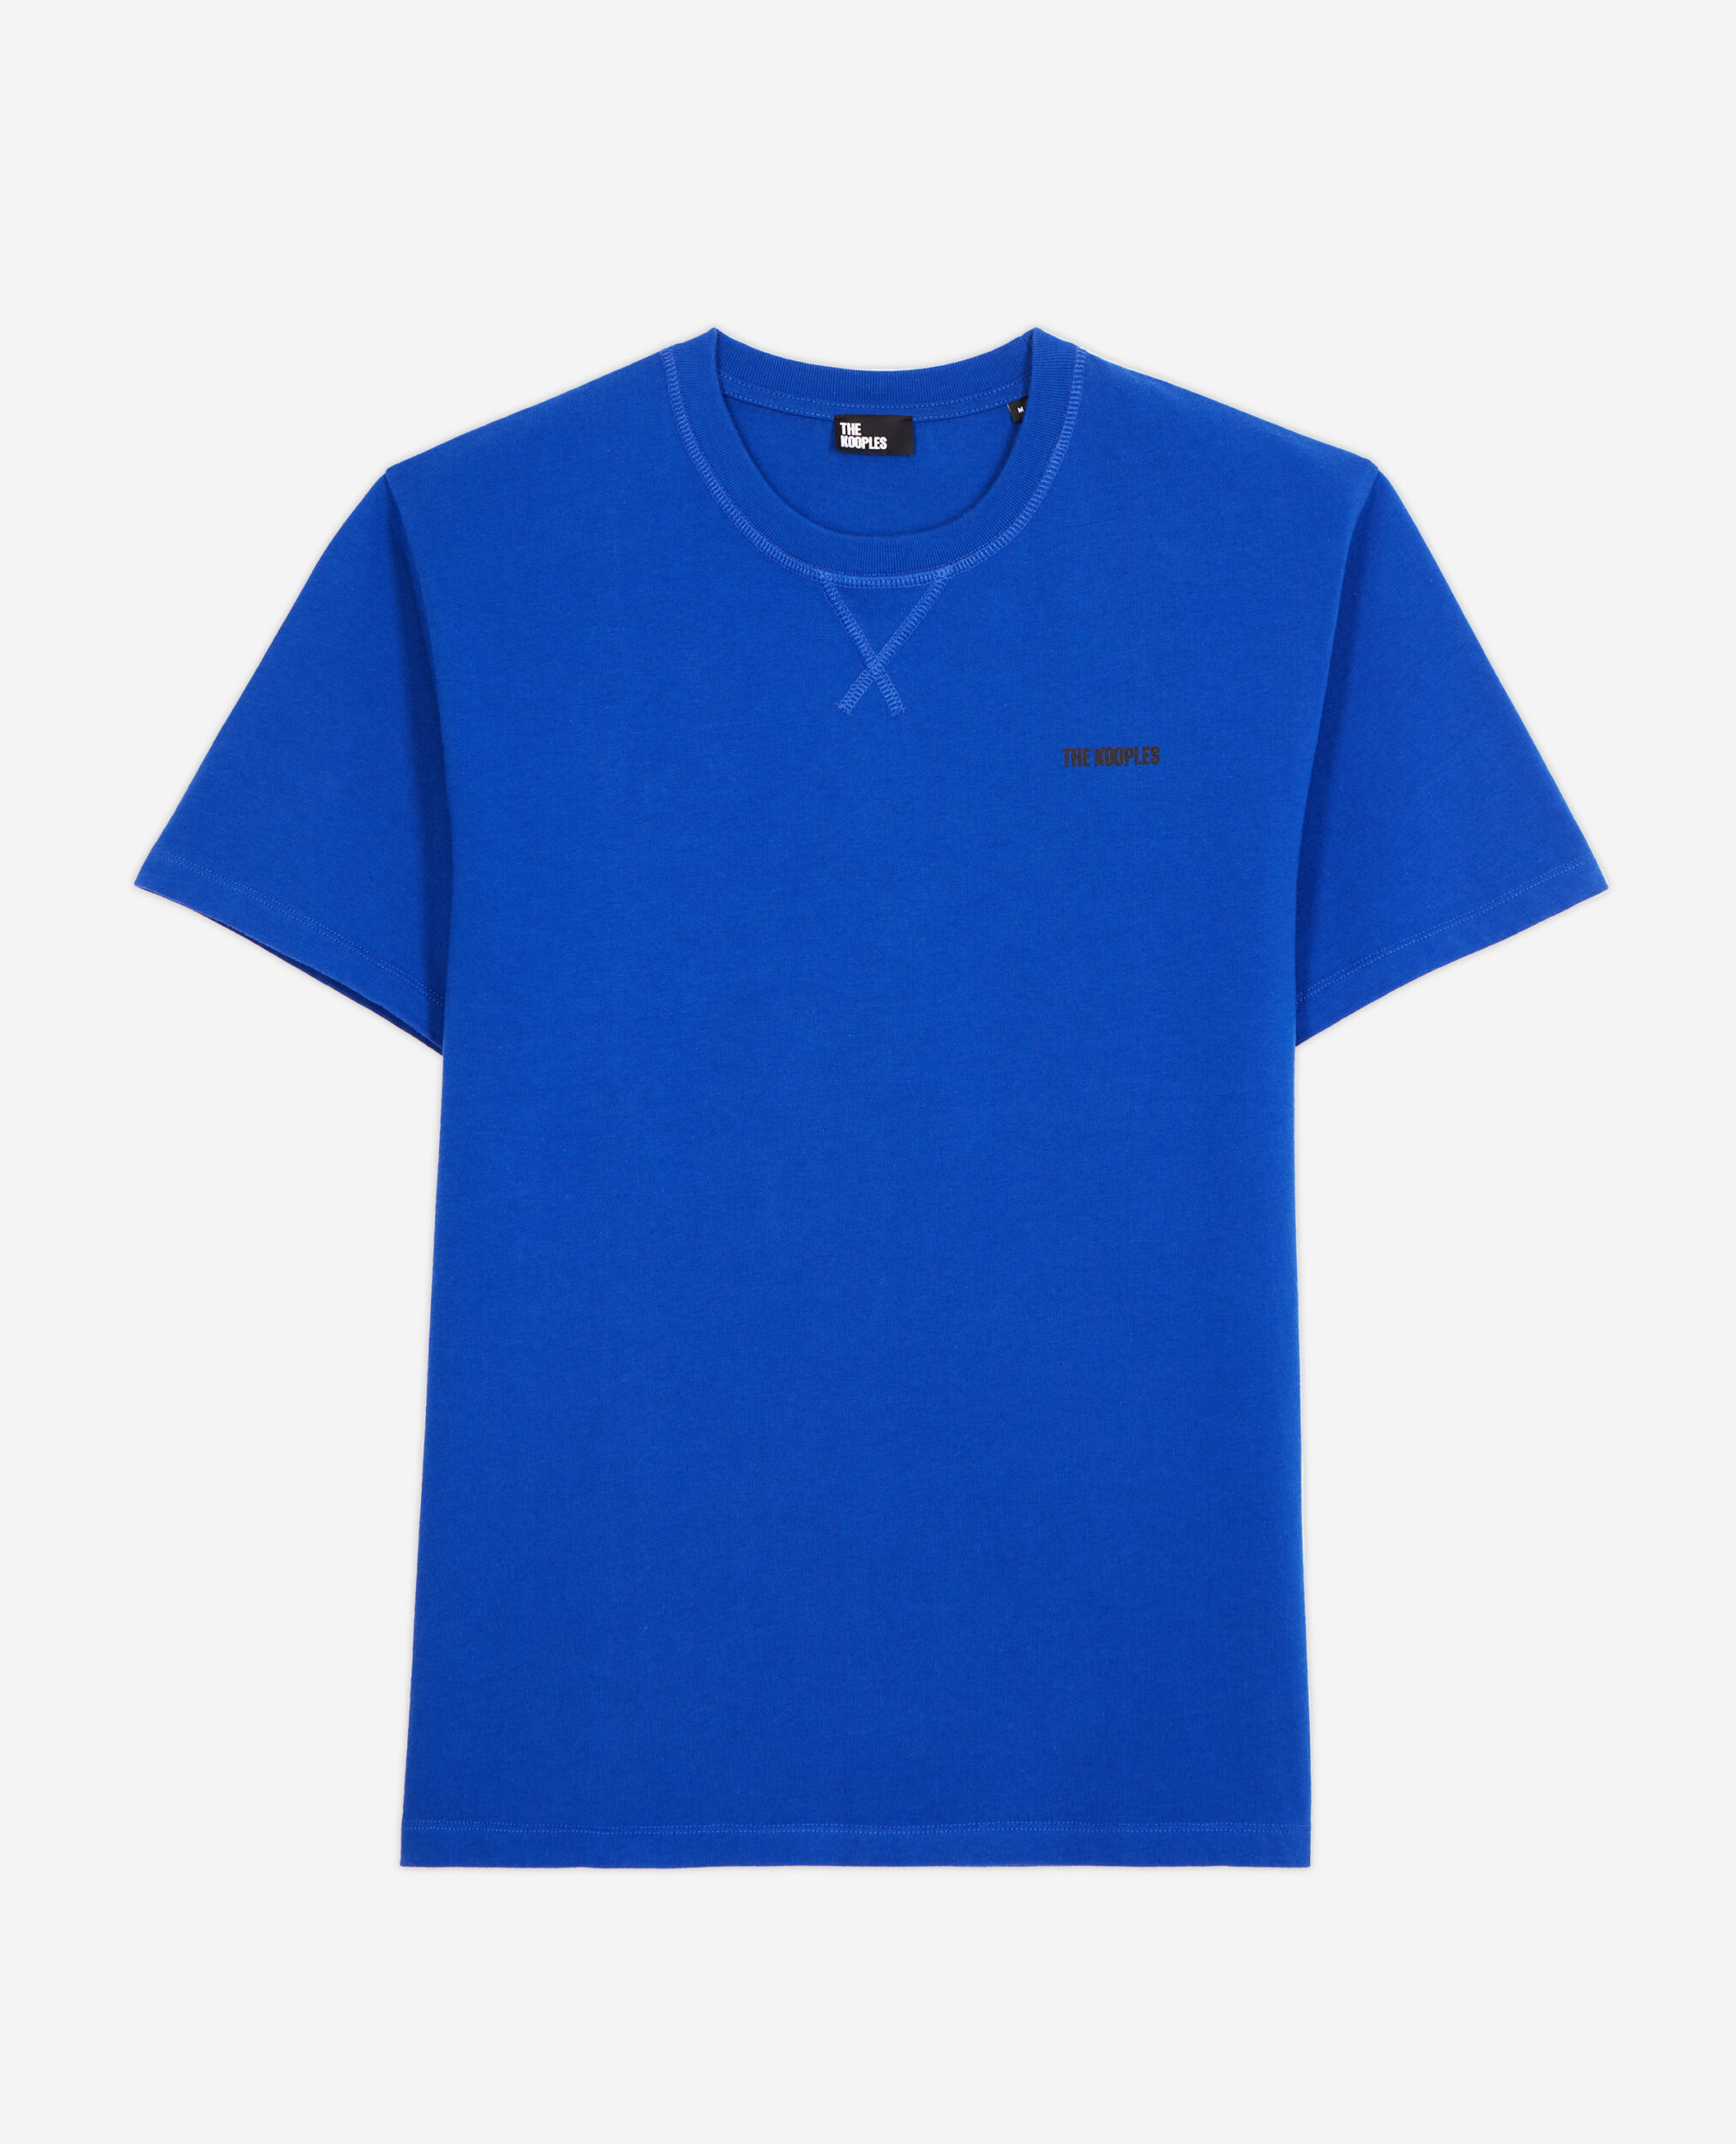 Camiseta logotipo The Kooples azul para hombre, BLUE ELECTRIC, hi-res image number null